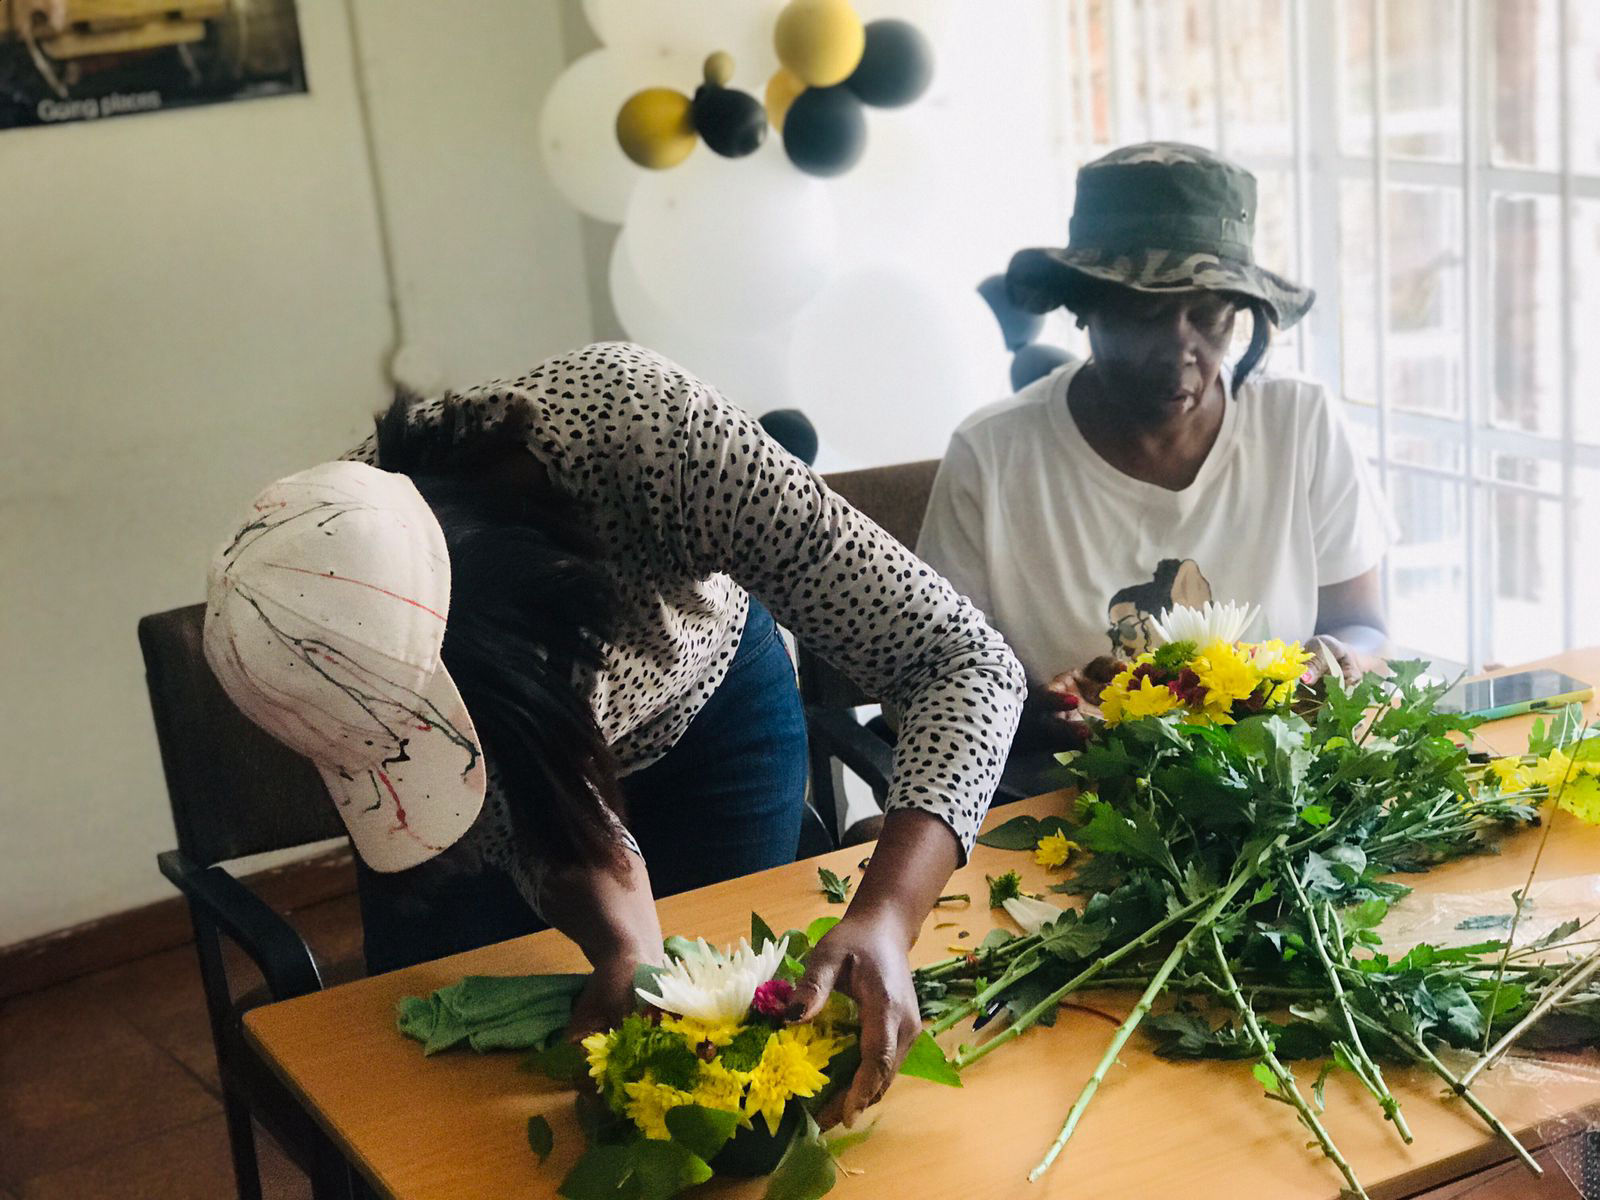 Flower arranging is part of the decor and events planning course at Outreach Foundation